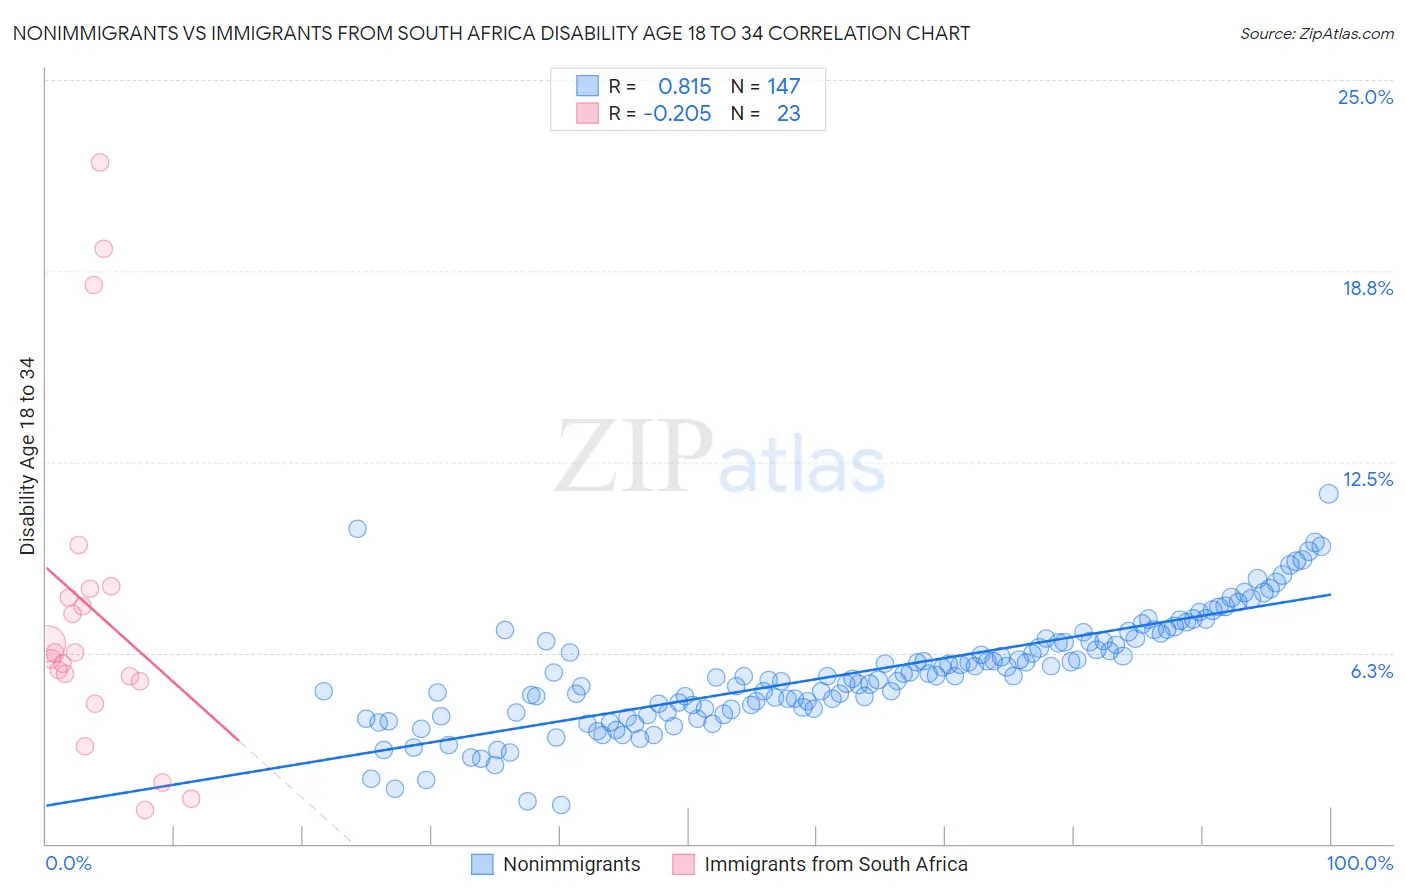 Nonimmigrants vs Immigrants from South Africa Disability Age 18 to 34